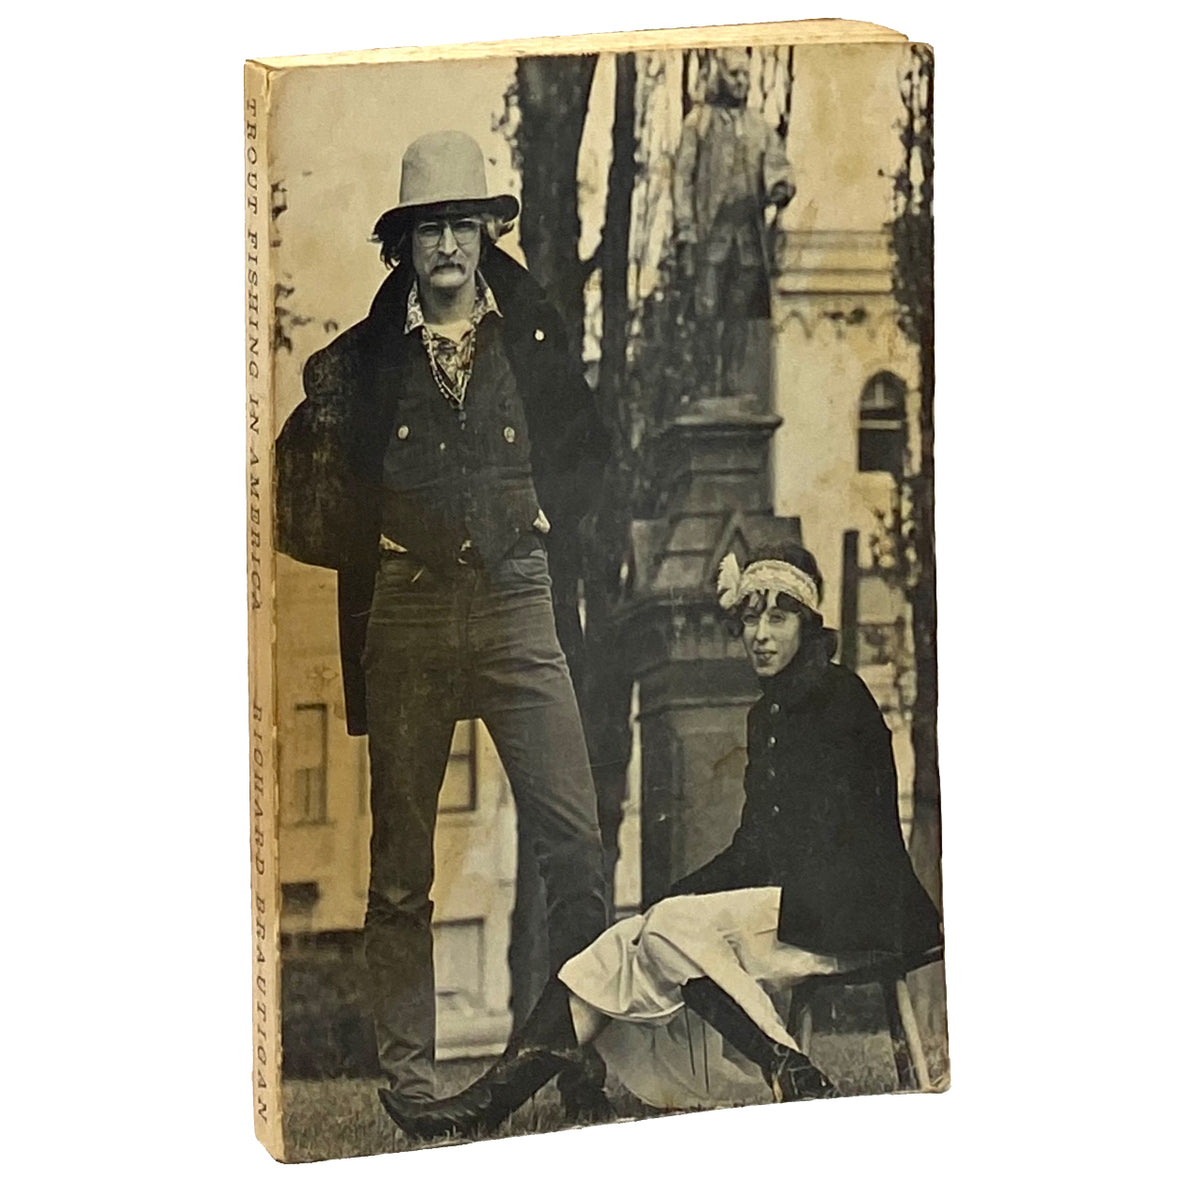 Richard Brautigan: A critical look at Trout Fishing in America, In